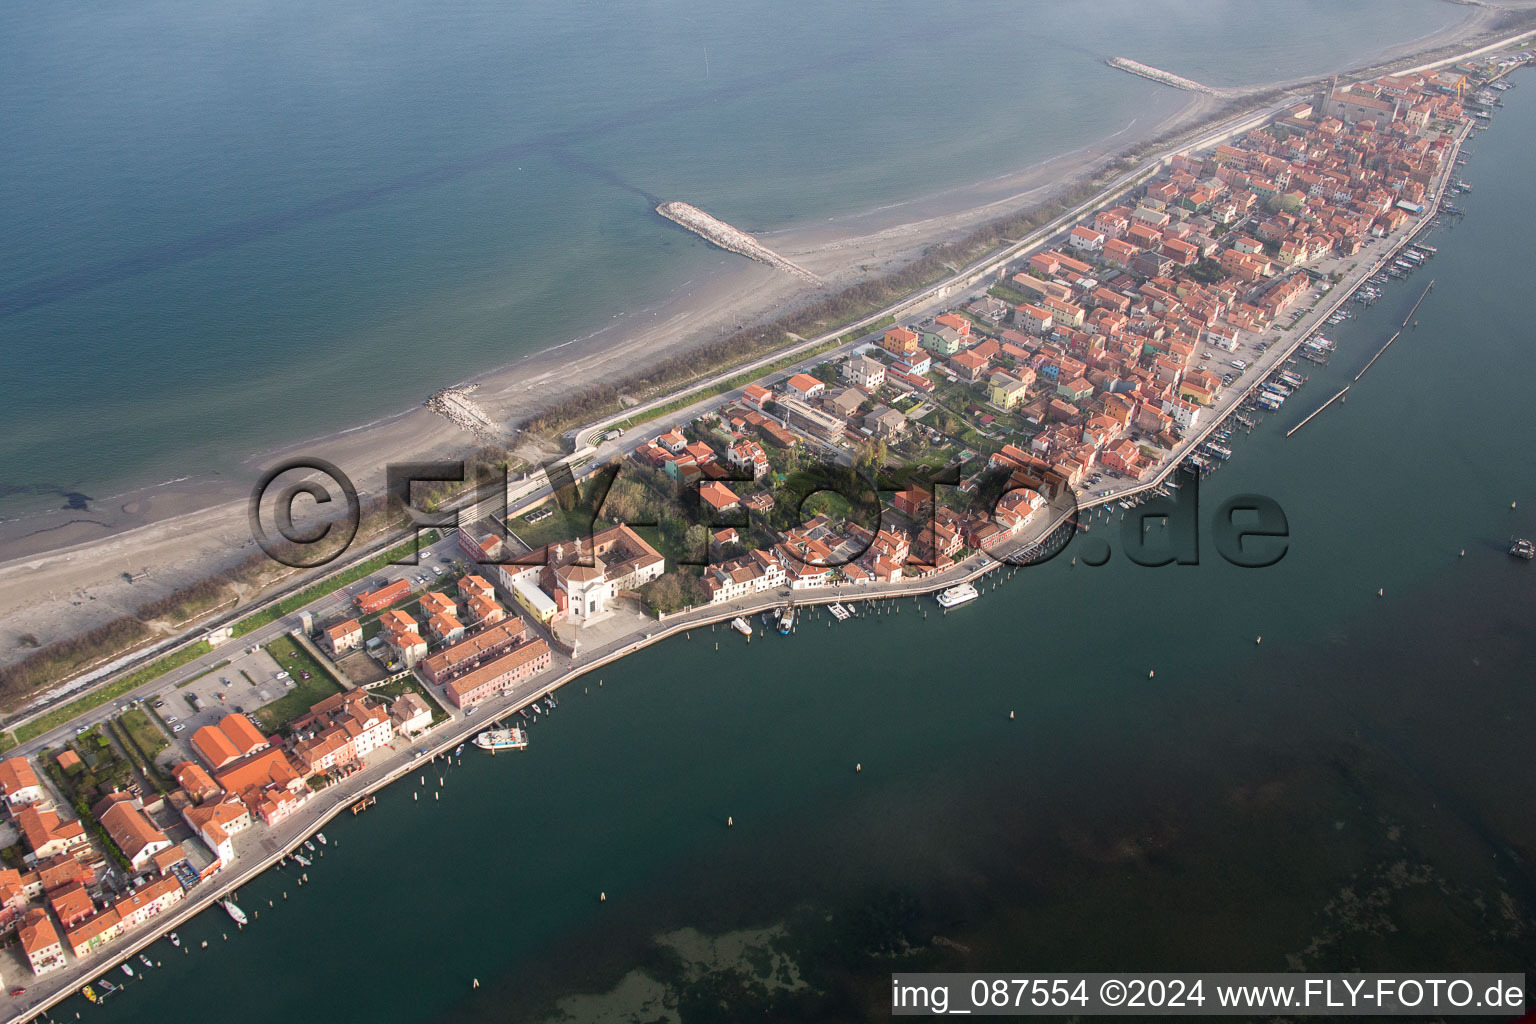 Townscape on the seacoast of Mediterranean Sea in San Vito in Veneto, Italy from above